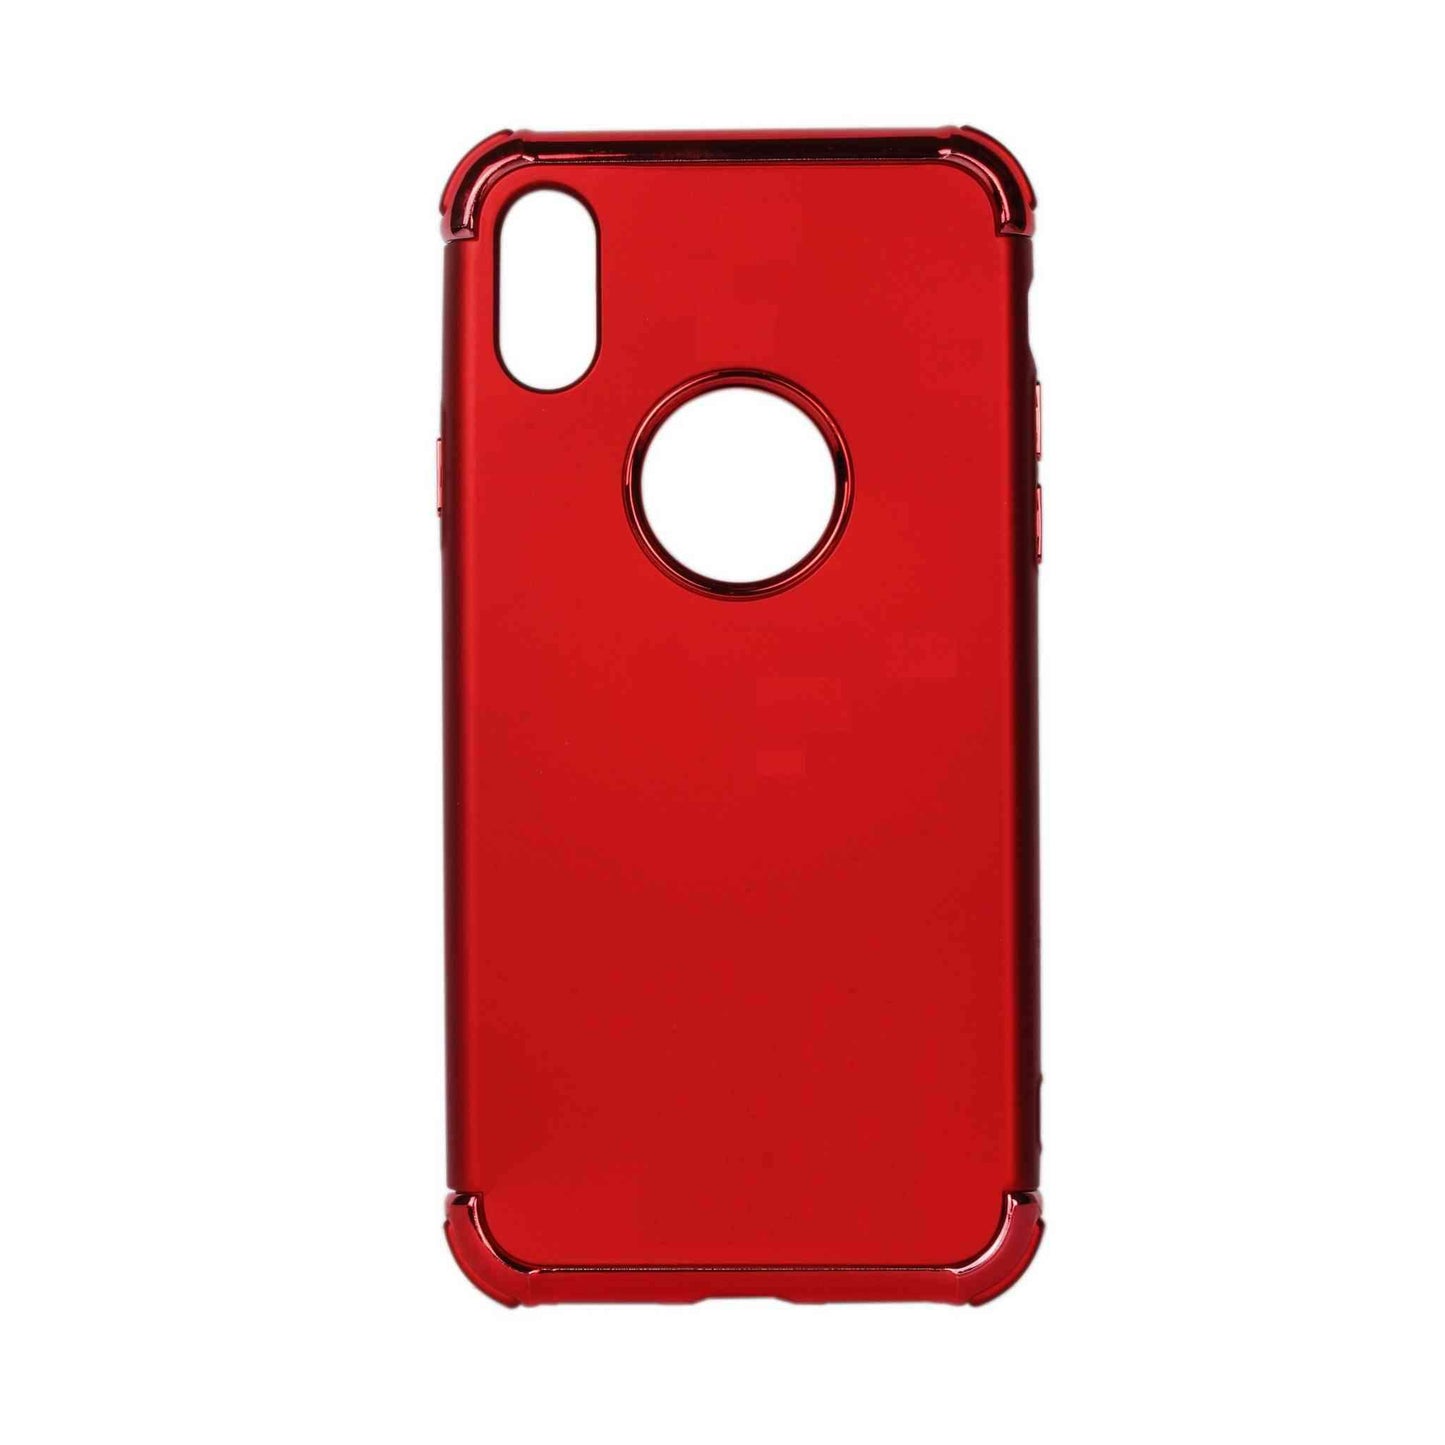 Indian Petals Polycarbonate Electro-plated Shock-proof Anti-scratch Protective Mobile Back Case Cover for Apple iPhone X, Red - Indian Petals